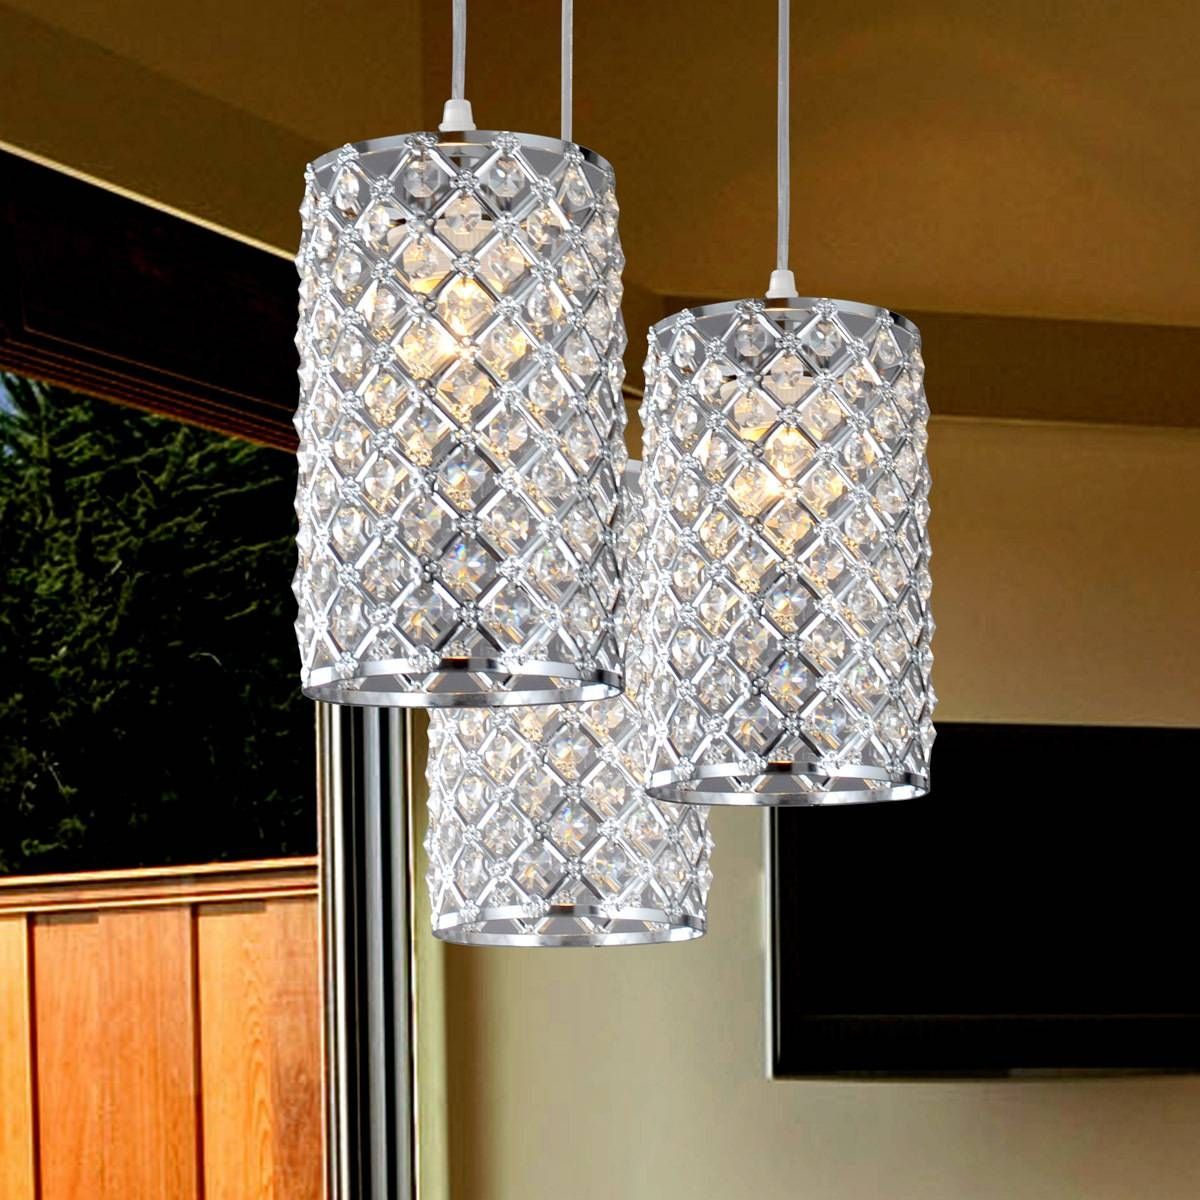 Hanging Fixtures: Light Up My Kitchen Throughout Entrance Pendant Lights (View 4 of 15)